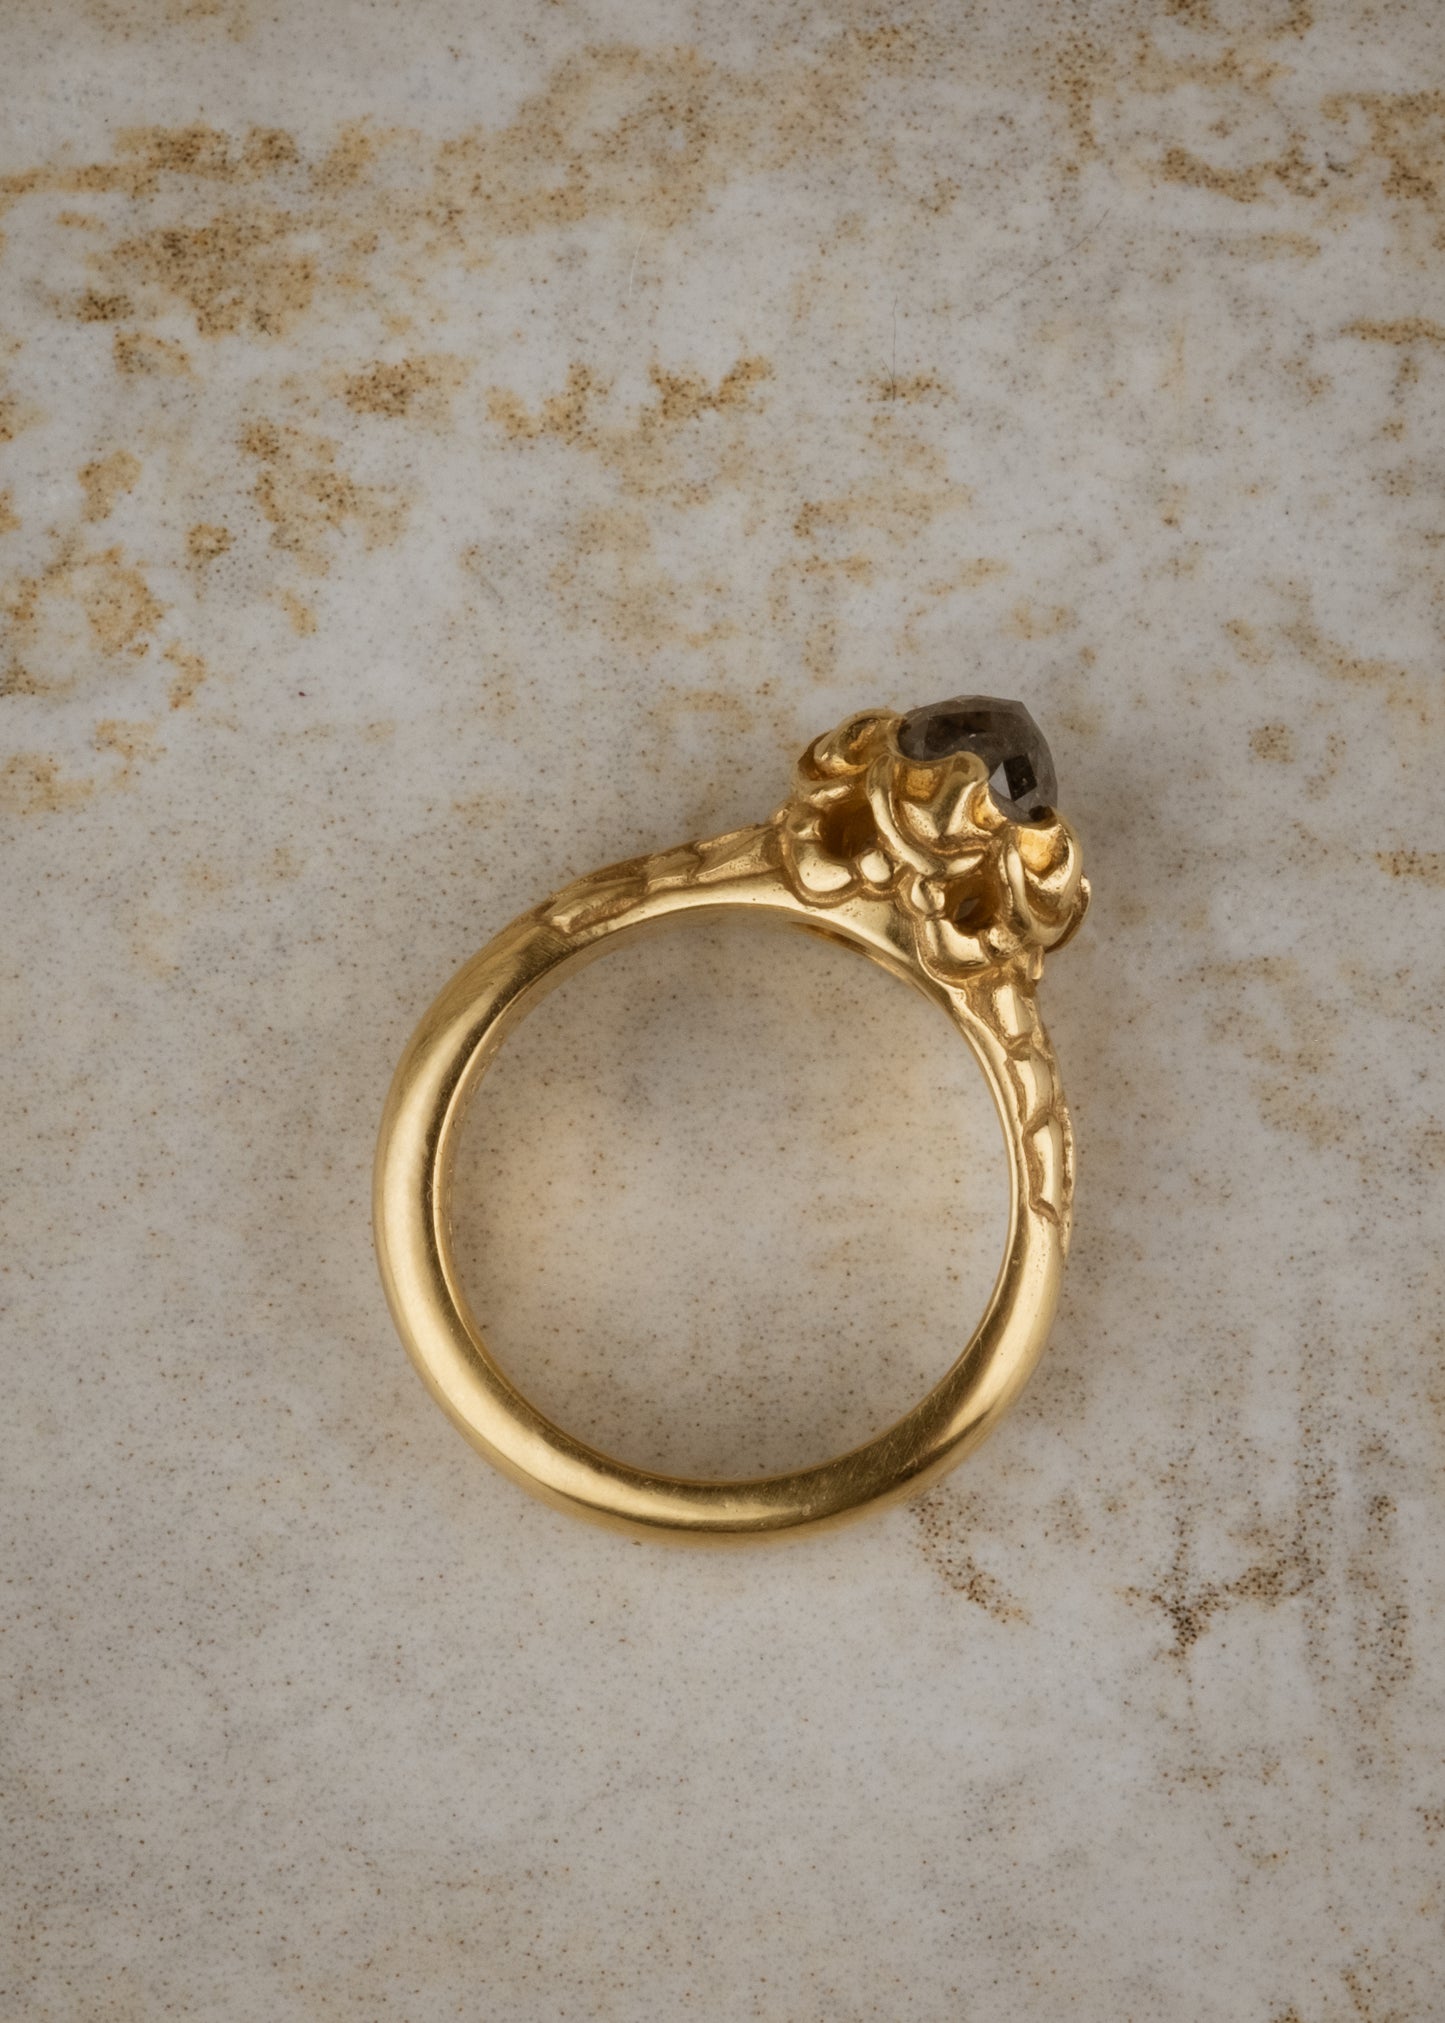 A celebration of craftsmanship, the Jubilee ring is hand-carved to bring out intricate elements in the band of gold, marrying substance with he supernal and revealing a rose cut diamond that mesmerizes with its depth and dimension. 